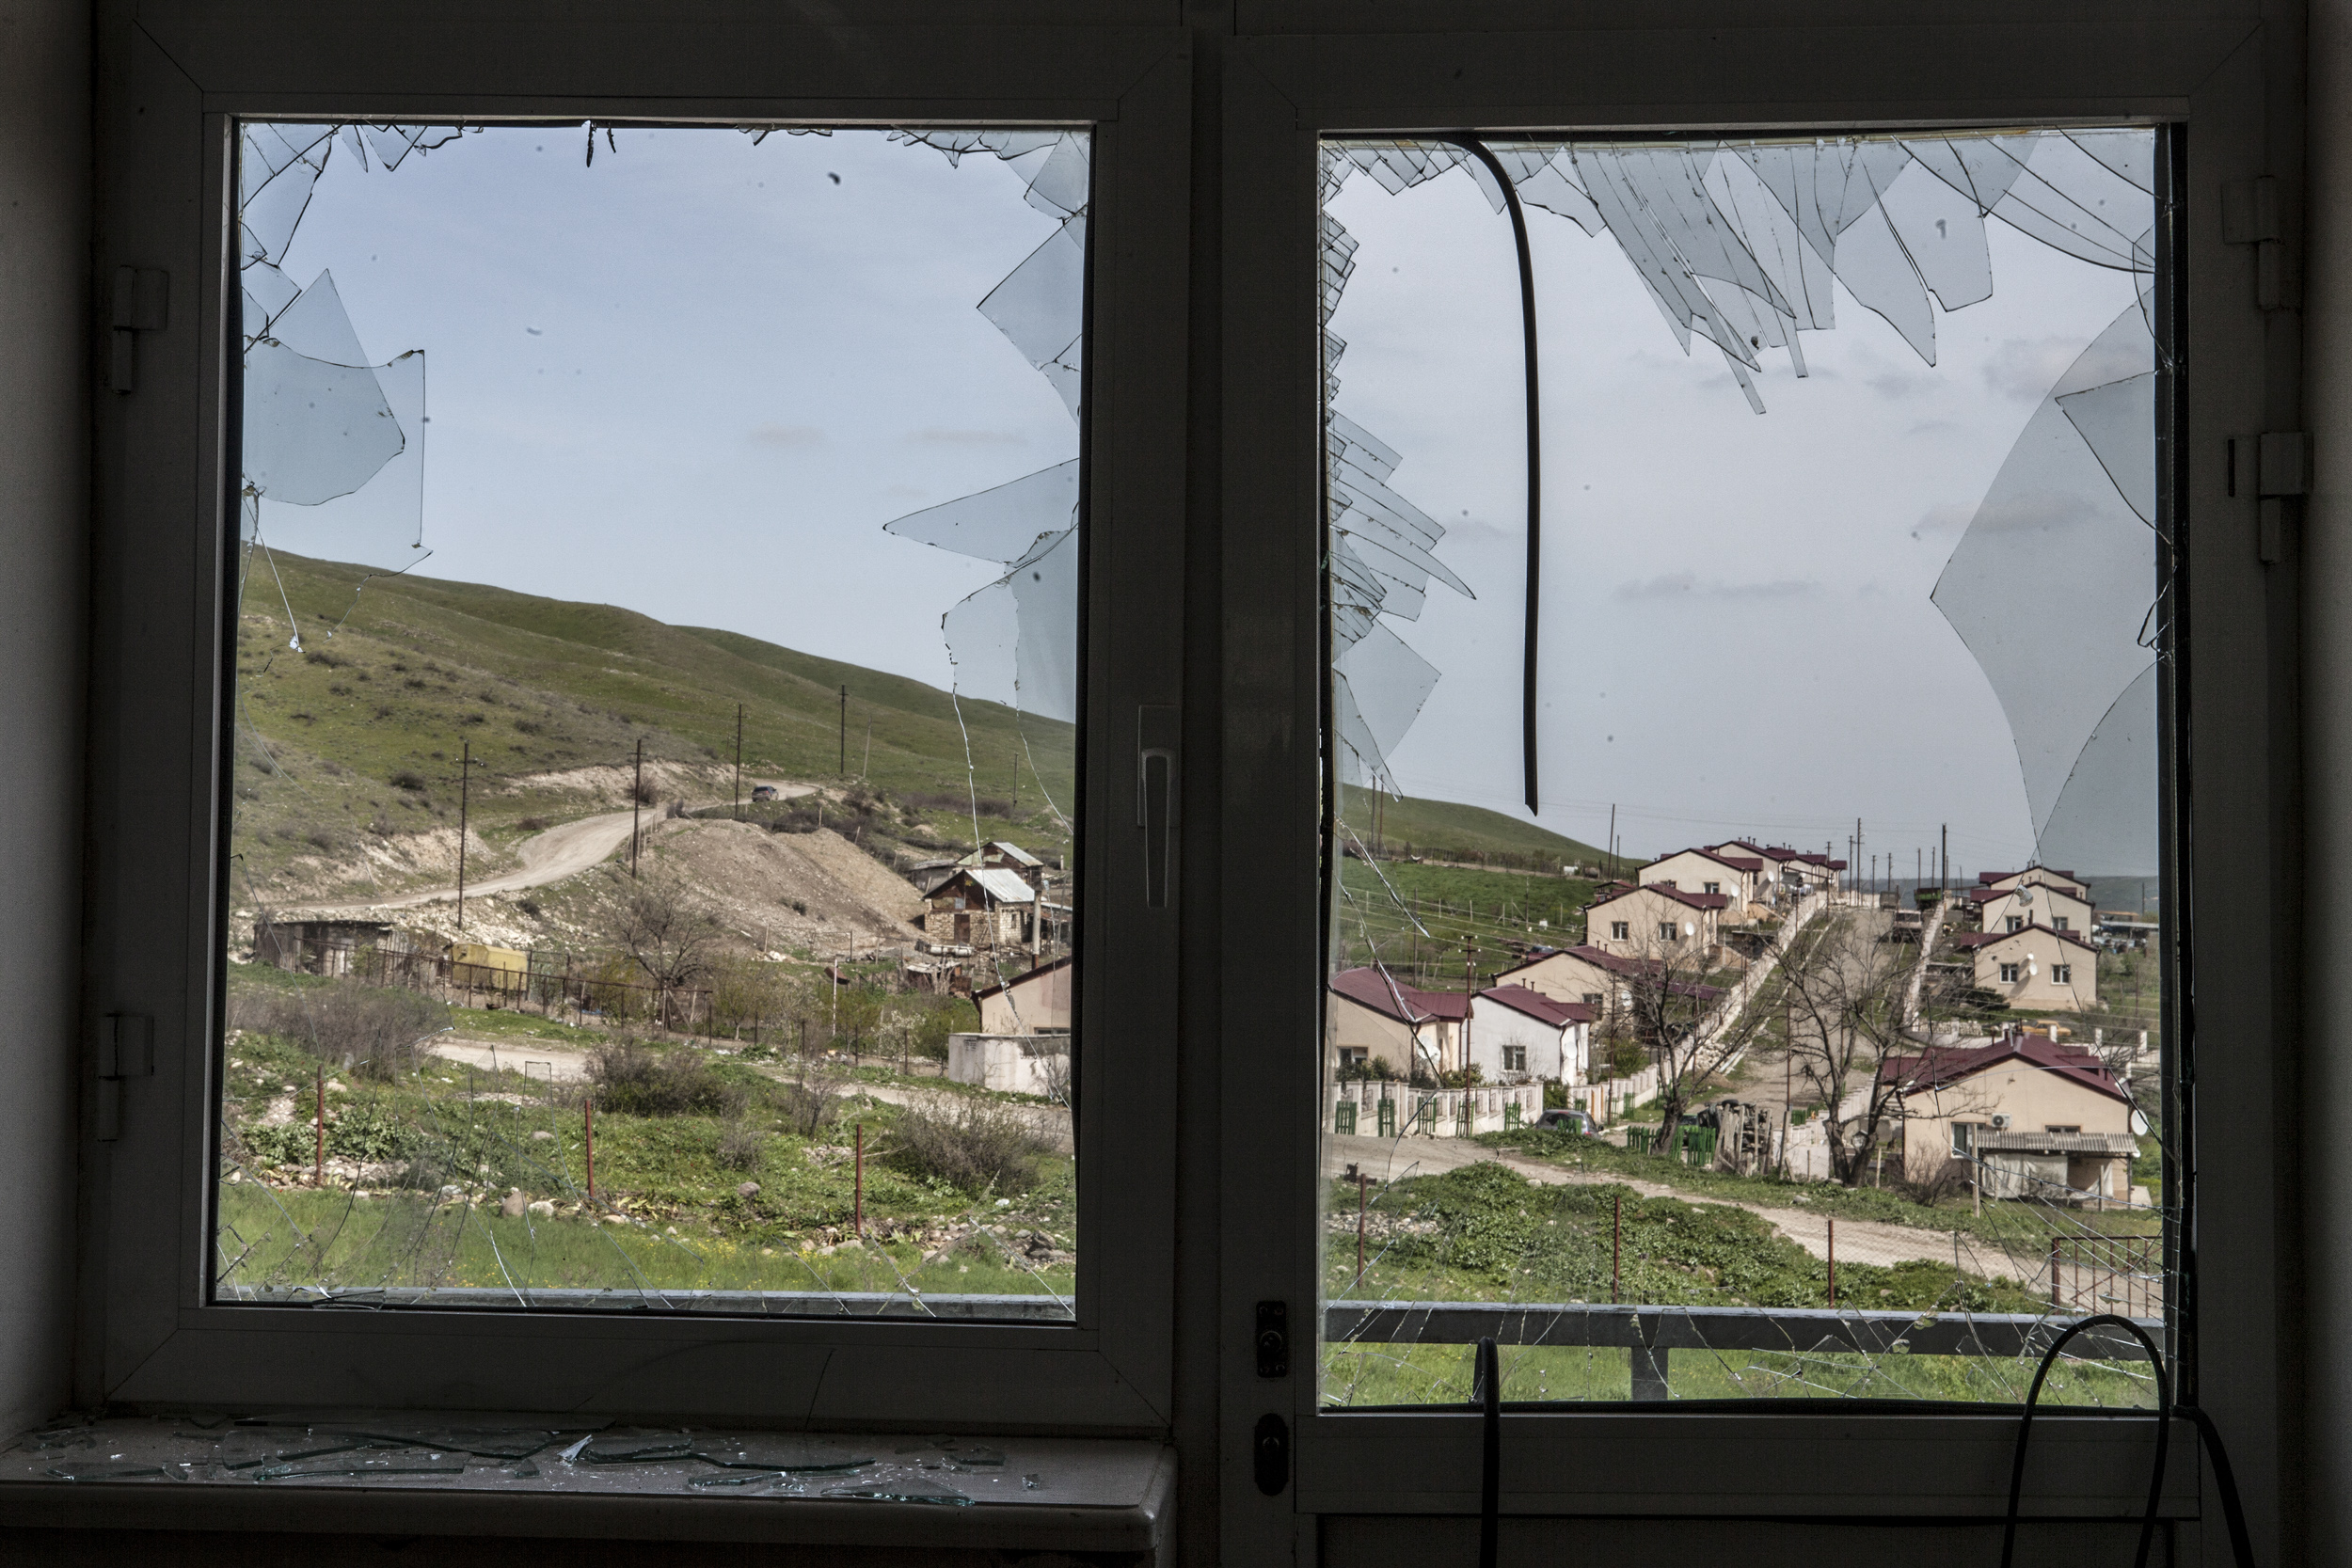  April 5- shattered windows of a school in the village of Mataghis where heavy shelling had taken place.  